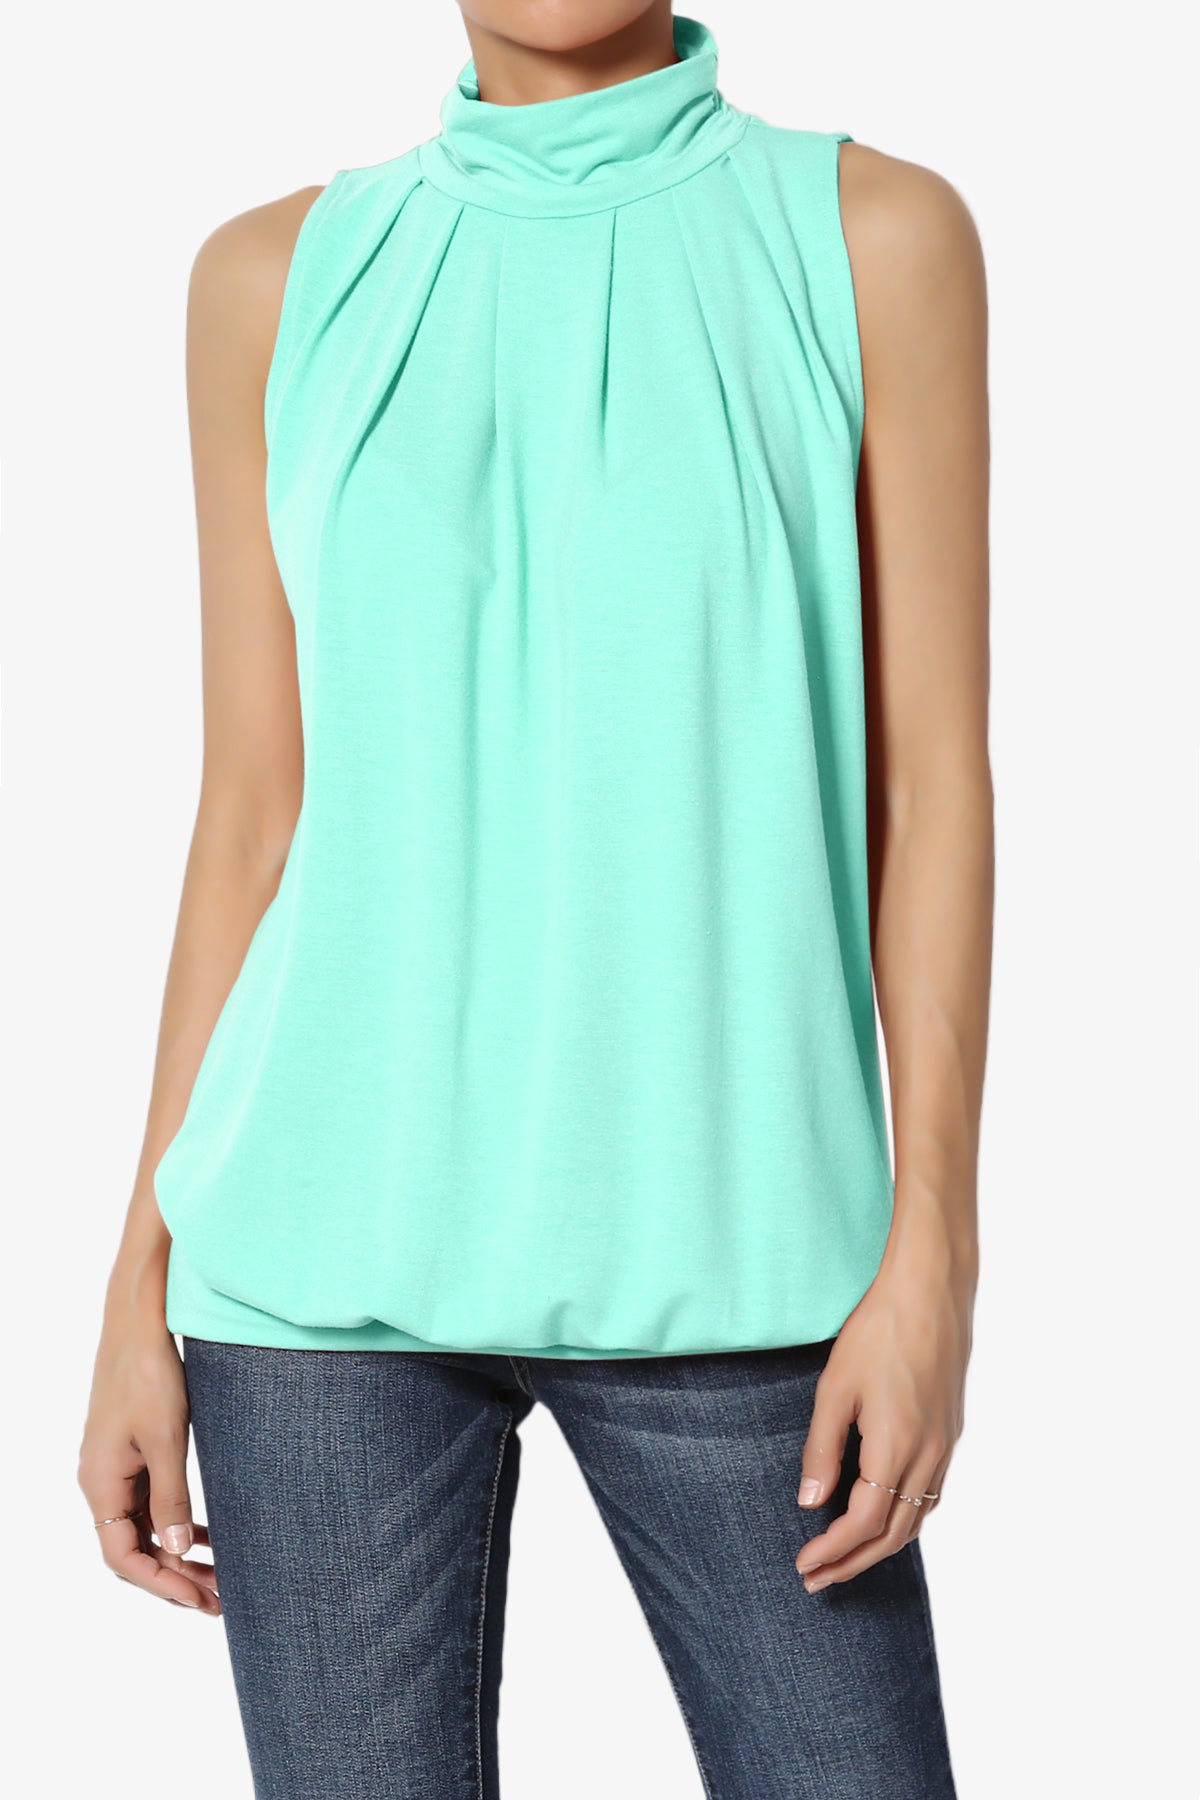 Load image into Gallery viewer, Jibbitz Sleeveless Mock Neck Pleated Top MINT_1
